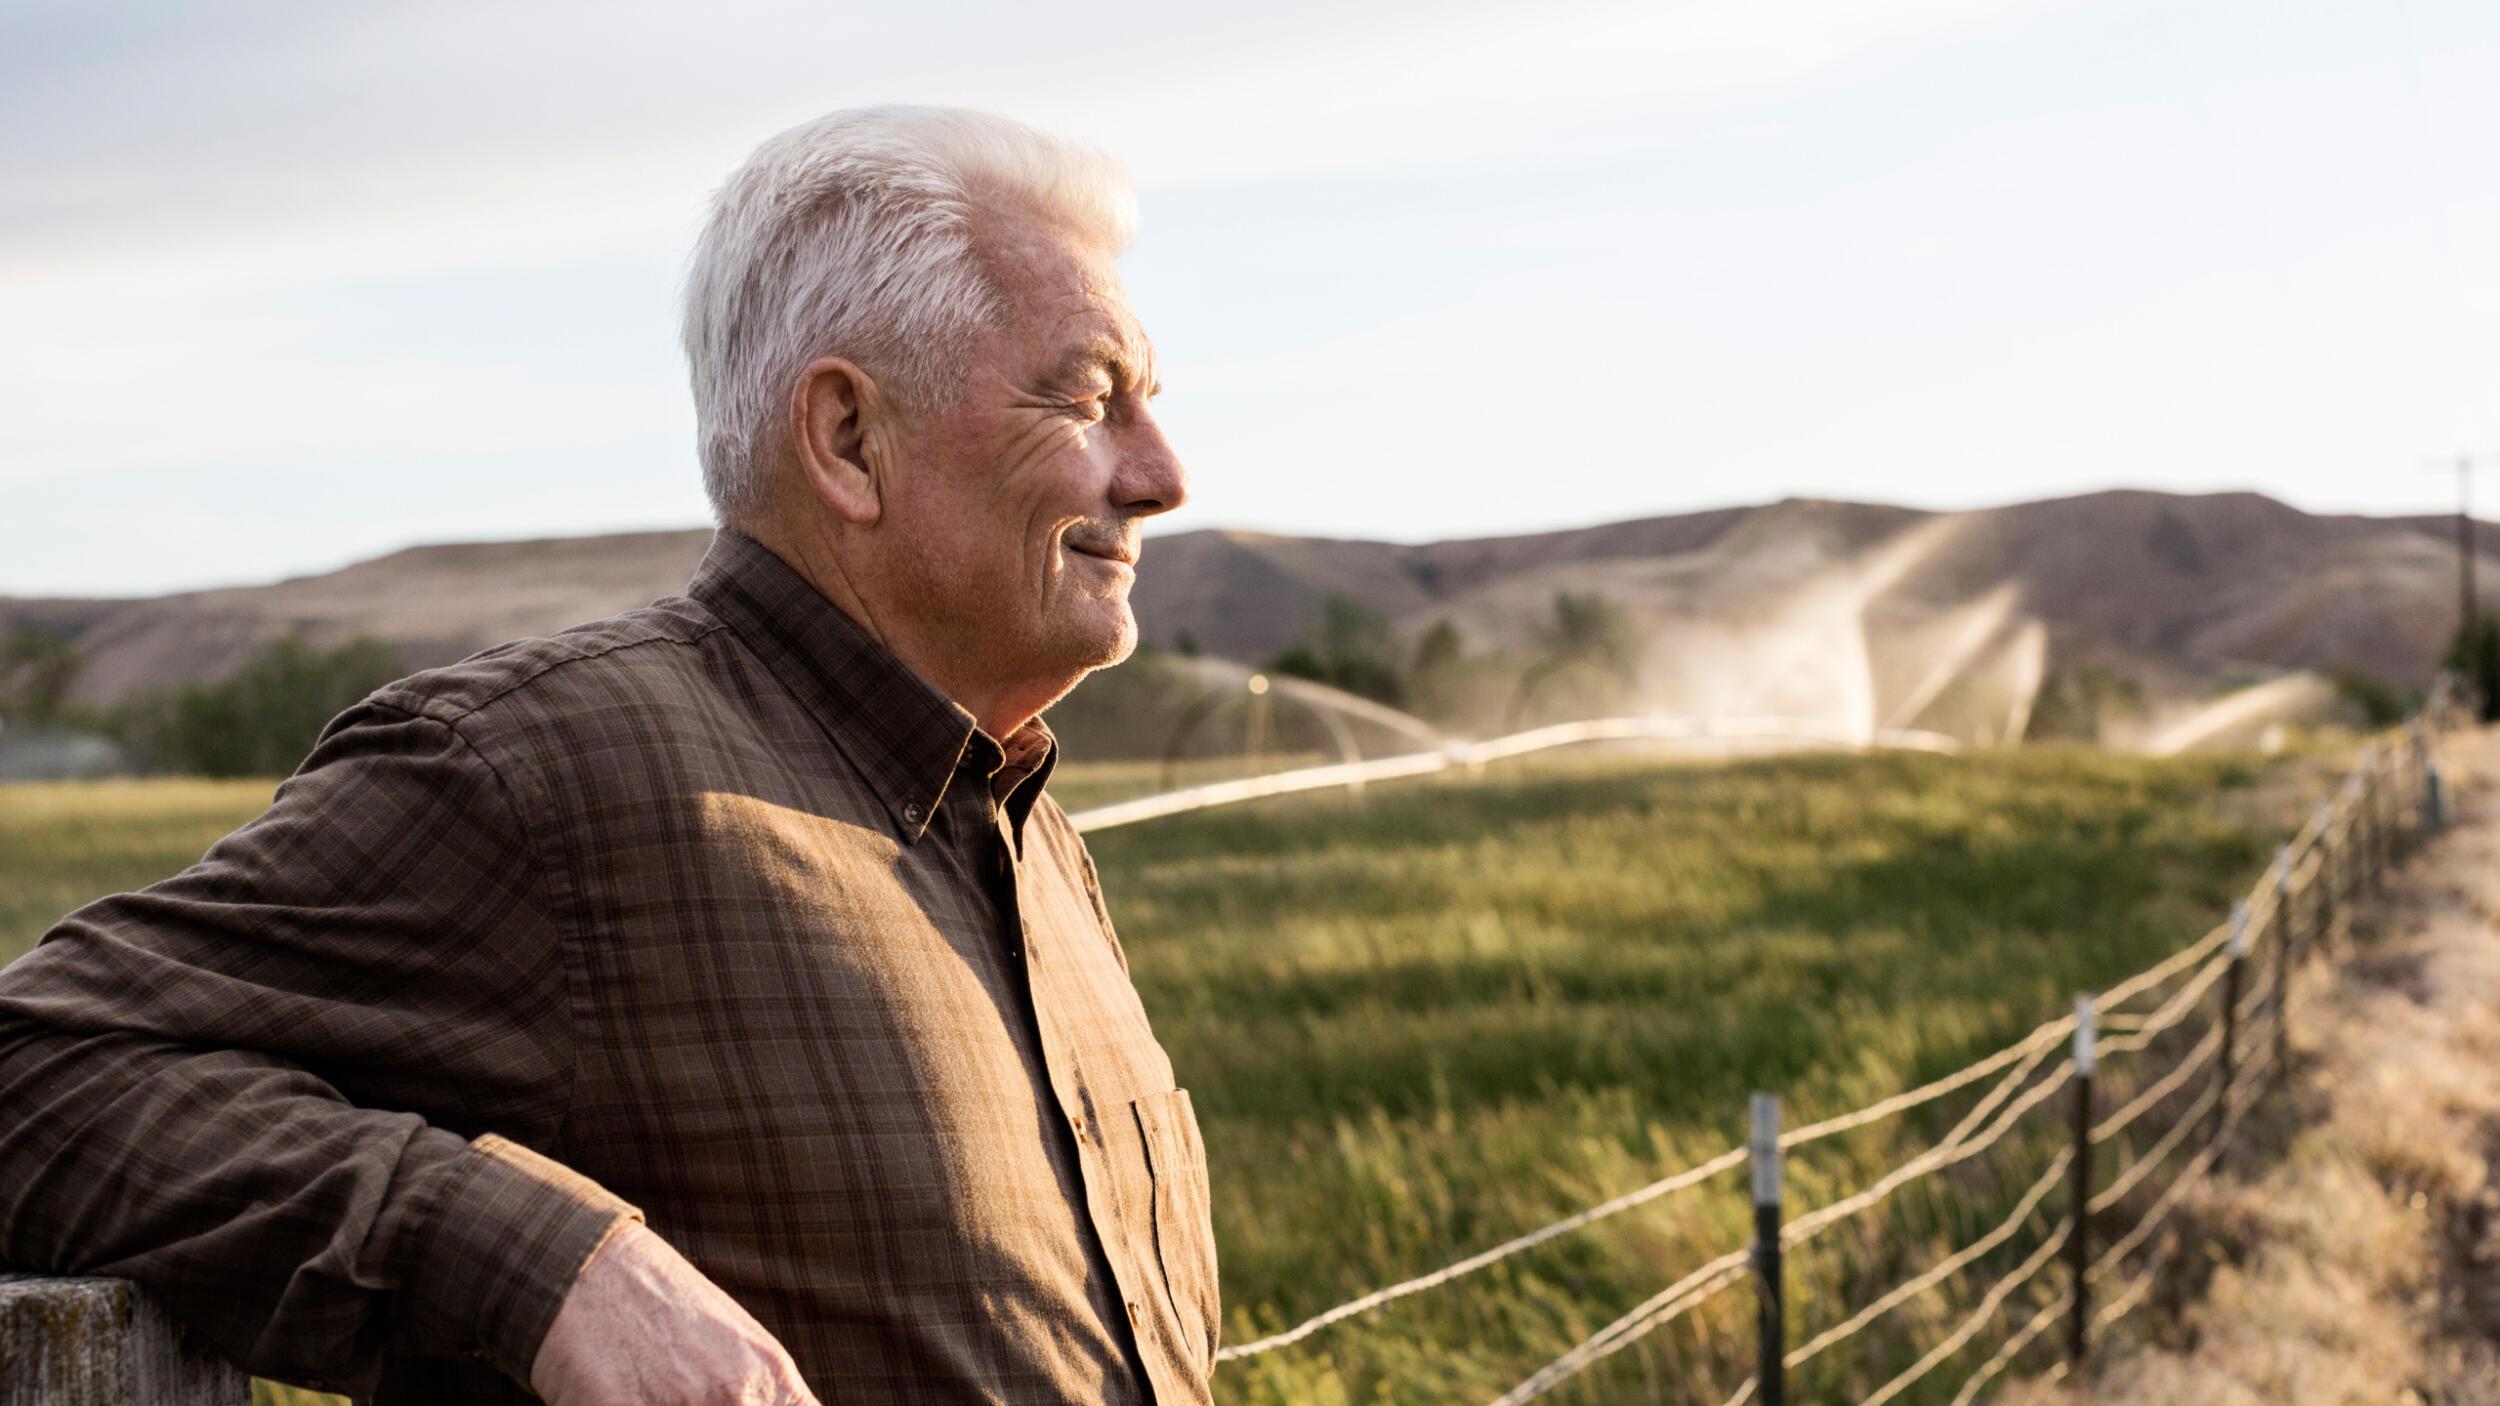 A farmer smiling as he watches his growing crops.